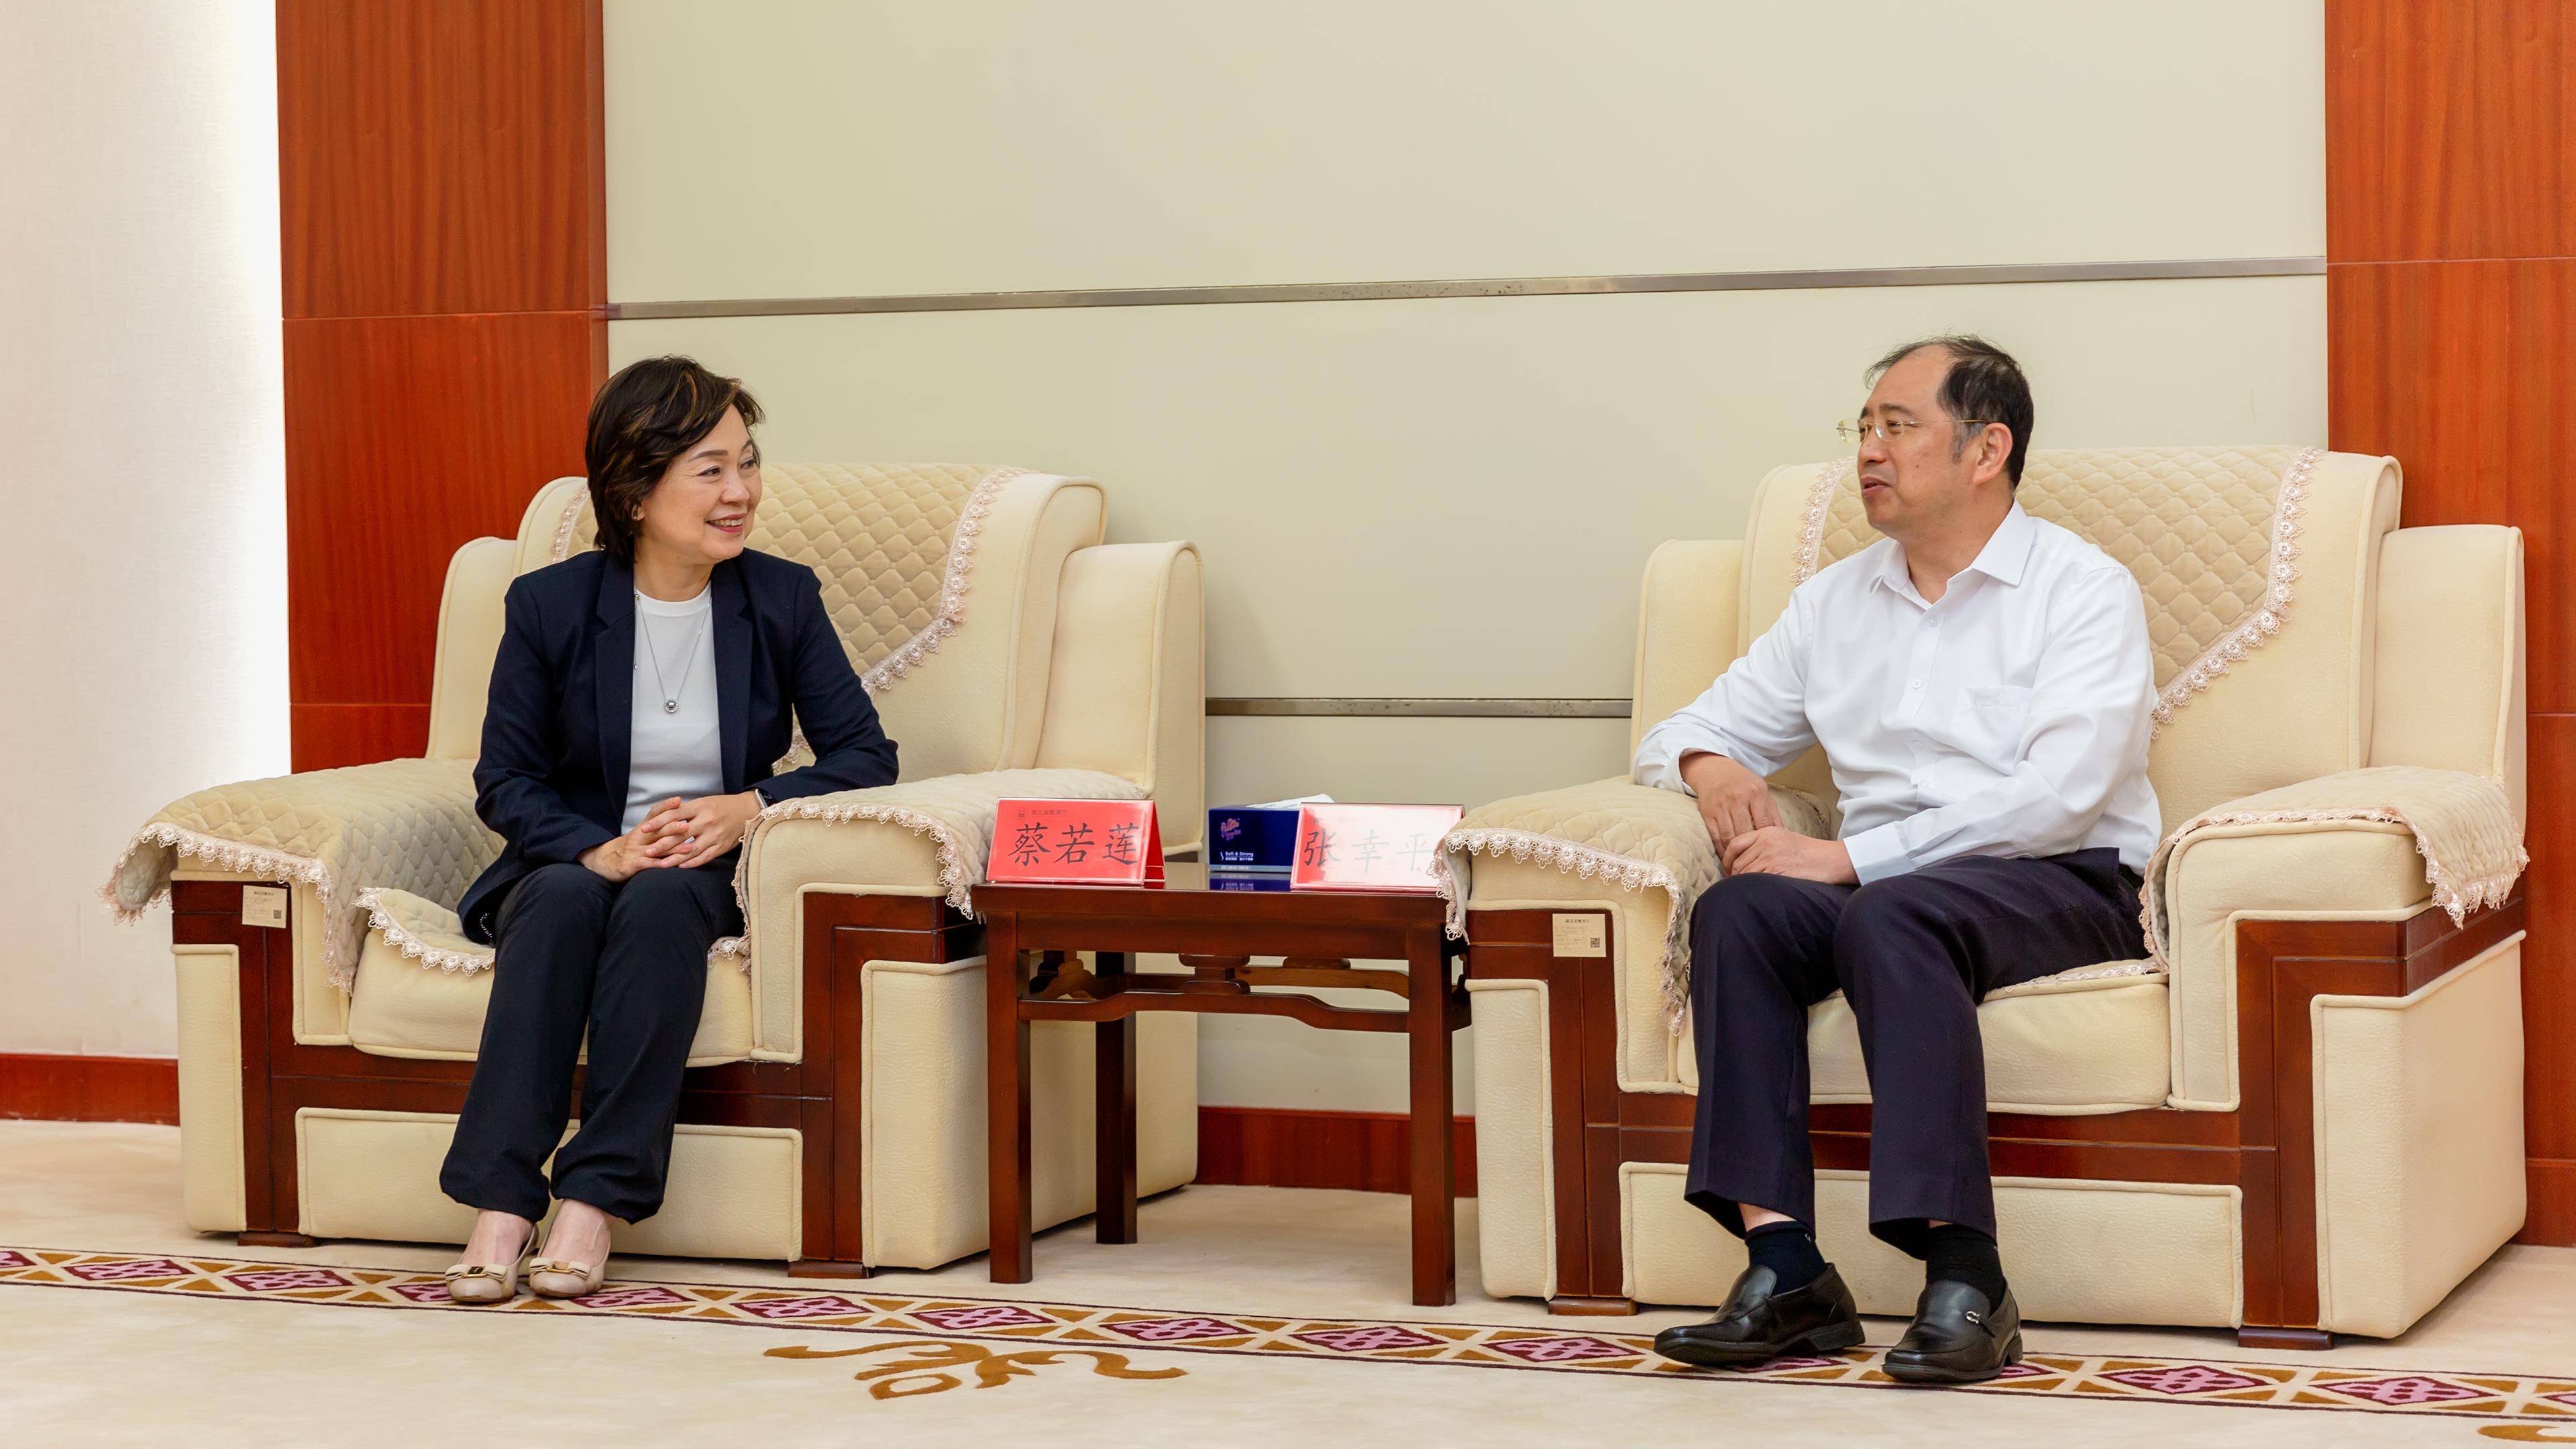 The Secretary for Education, Dr Choi Yuk-lin (left), met the Deputy Secretary of the Education Working Committee of the Communist Party of China Hubei Provincial Committee, Mr Zhang Xingping (right), during her visit to Wuhan on September 20.